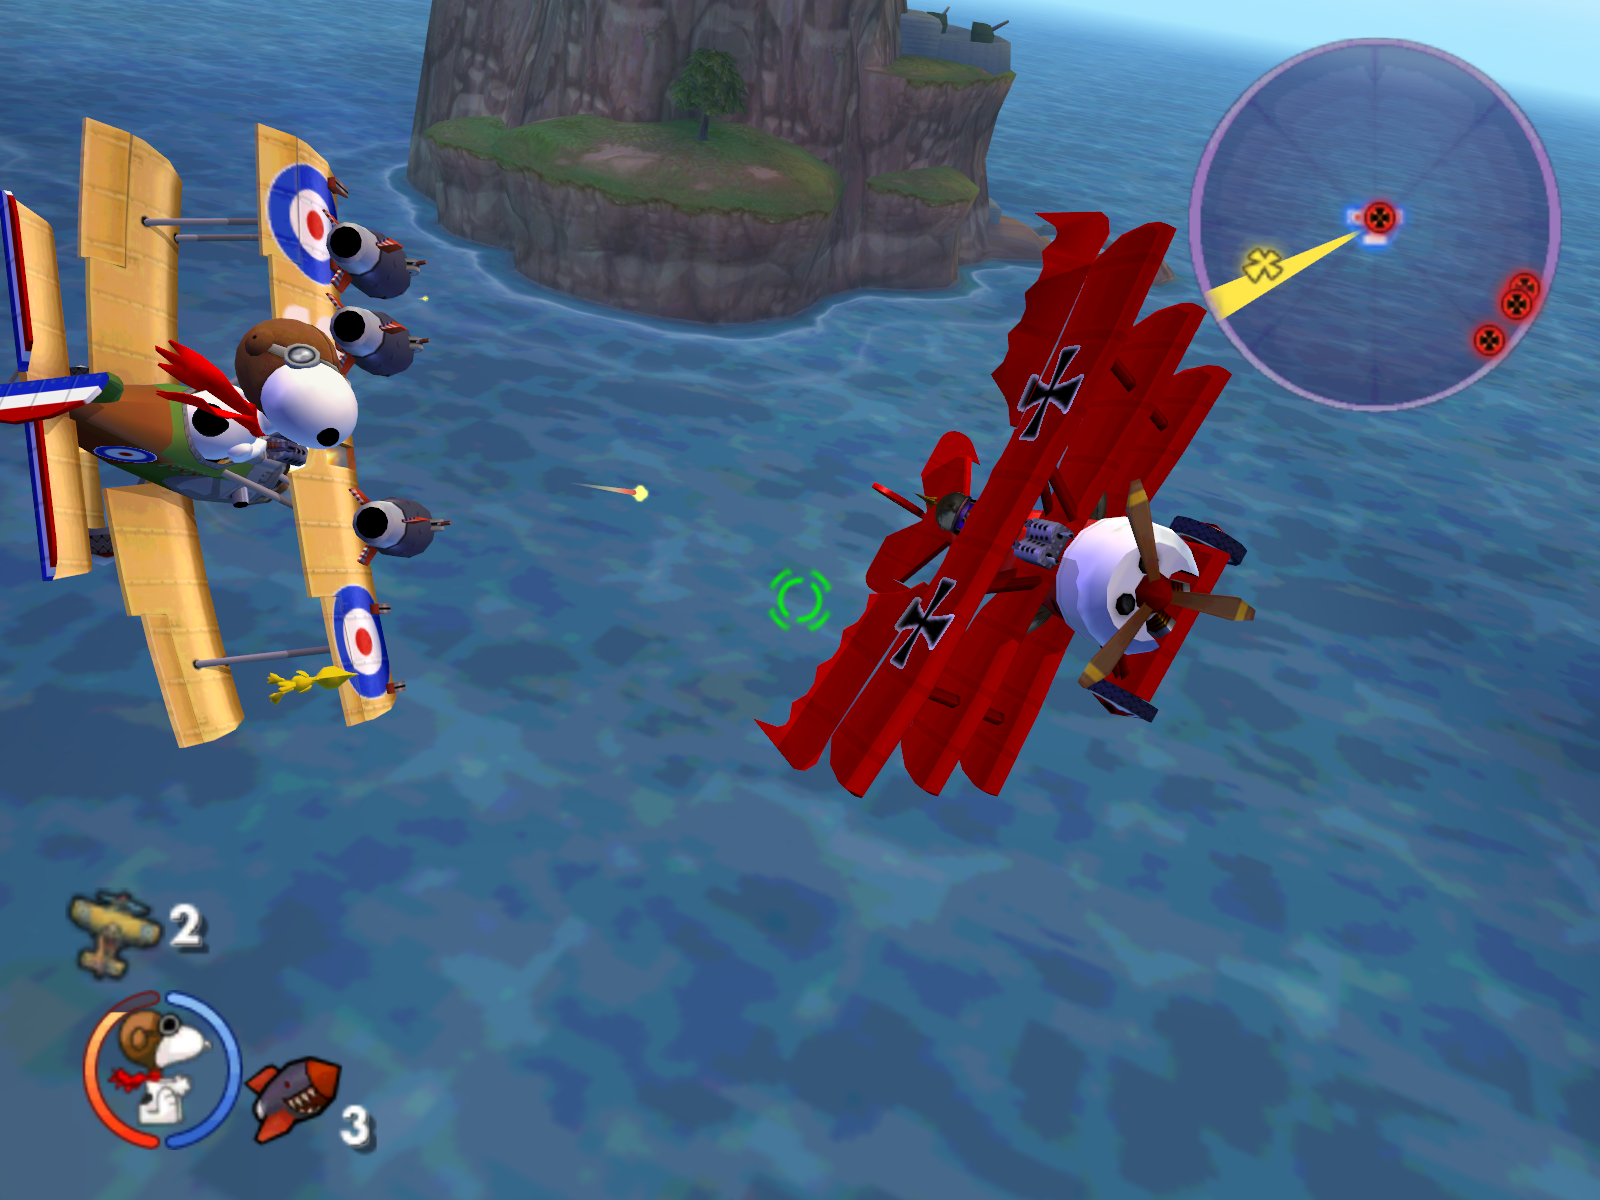 Snoopy vs. the Red Baron Screenshots for Windows - MobyGames